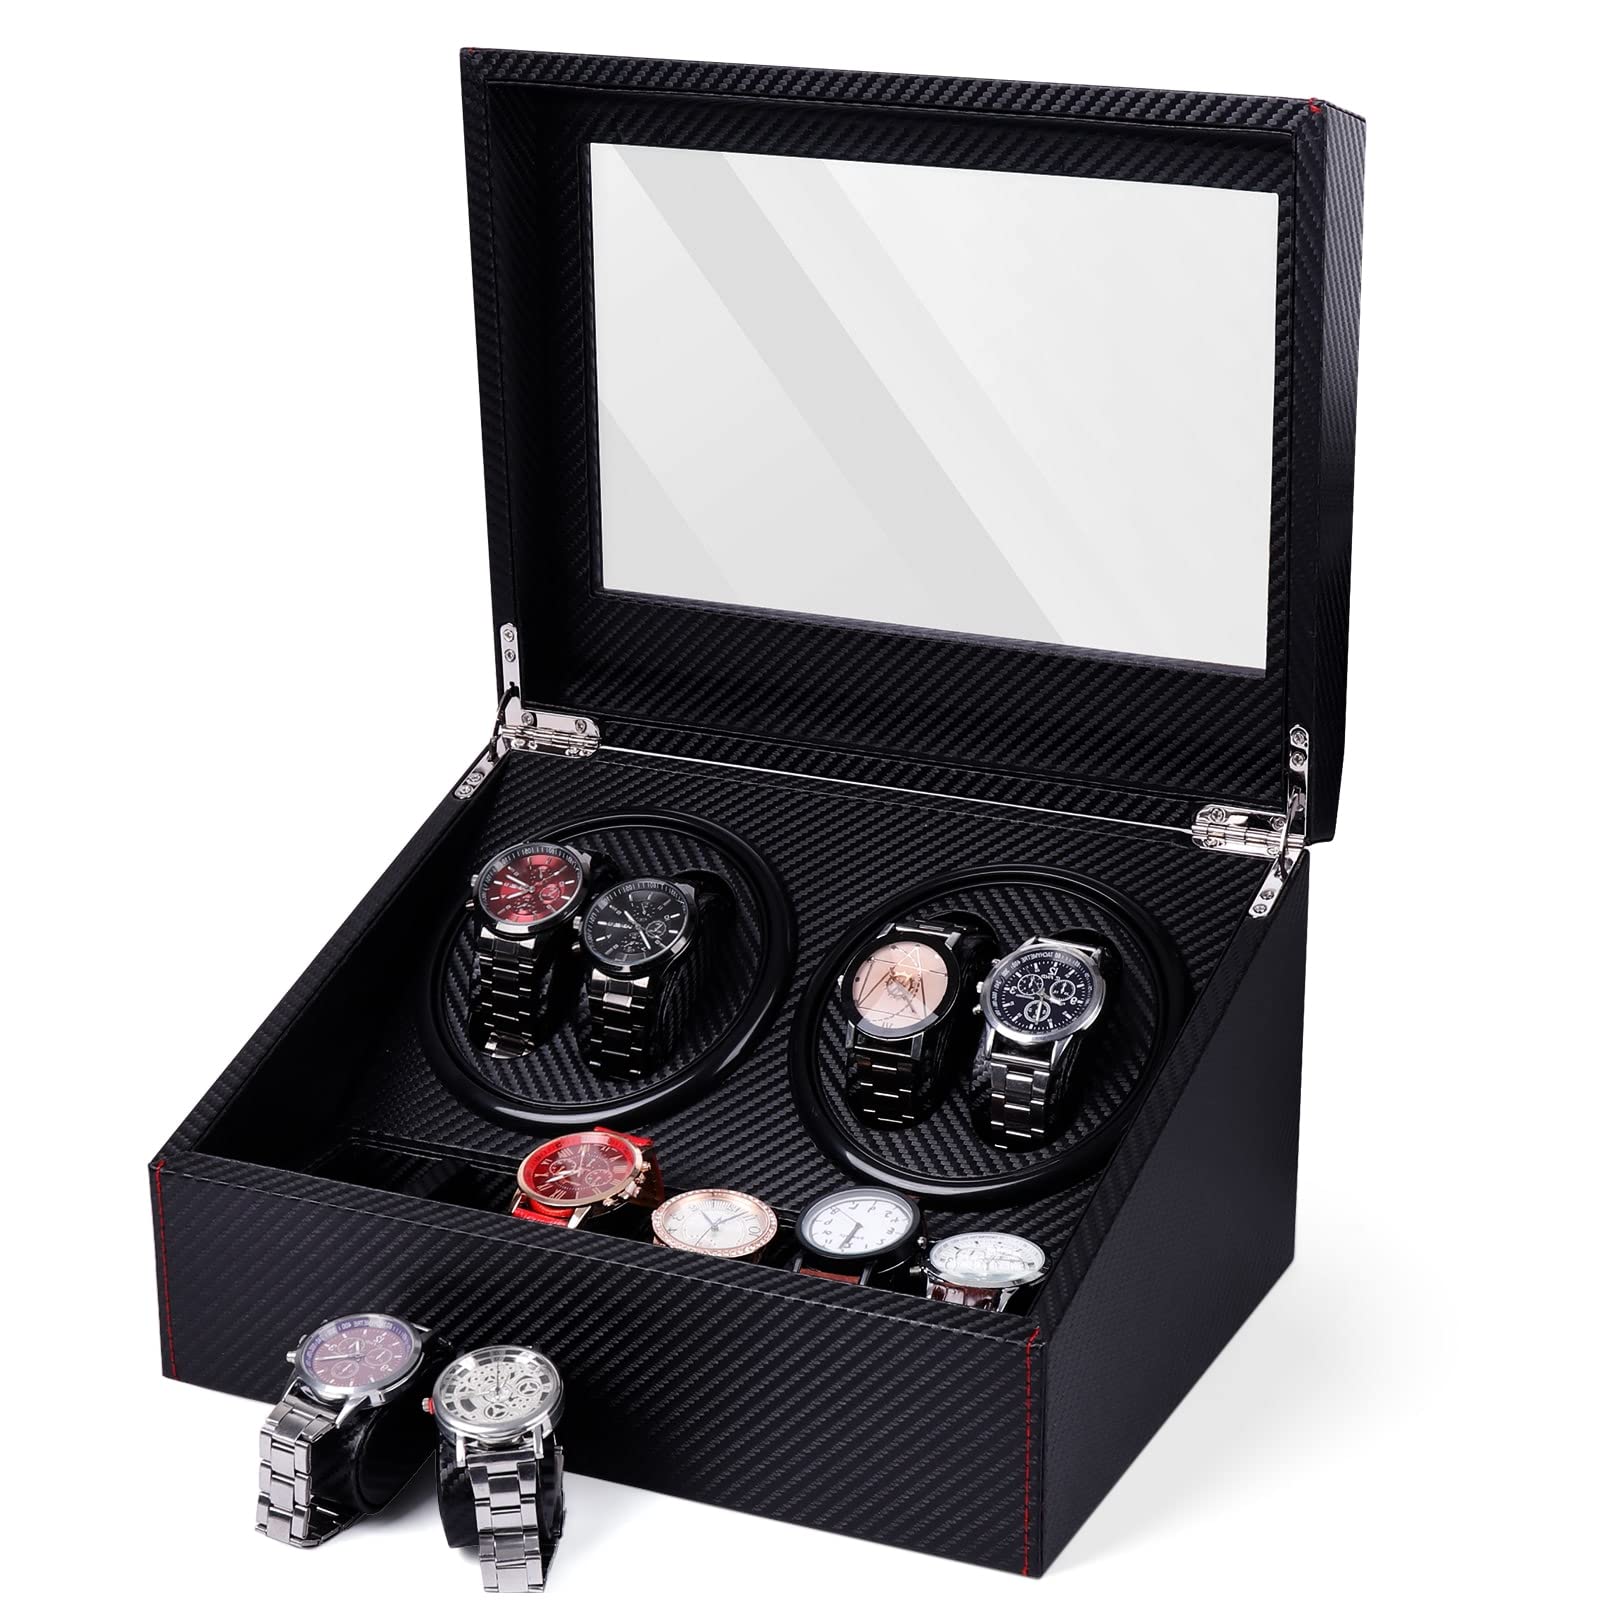 LALAHOO Watch Winder for Automatic Watches, 4 Automatic Watches with 6 Watches Storages, Carbon Fiber Styling Automatic Watch Winder